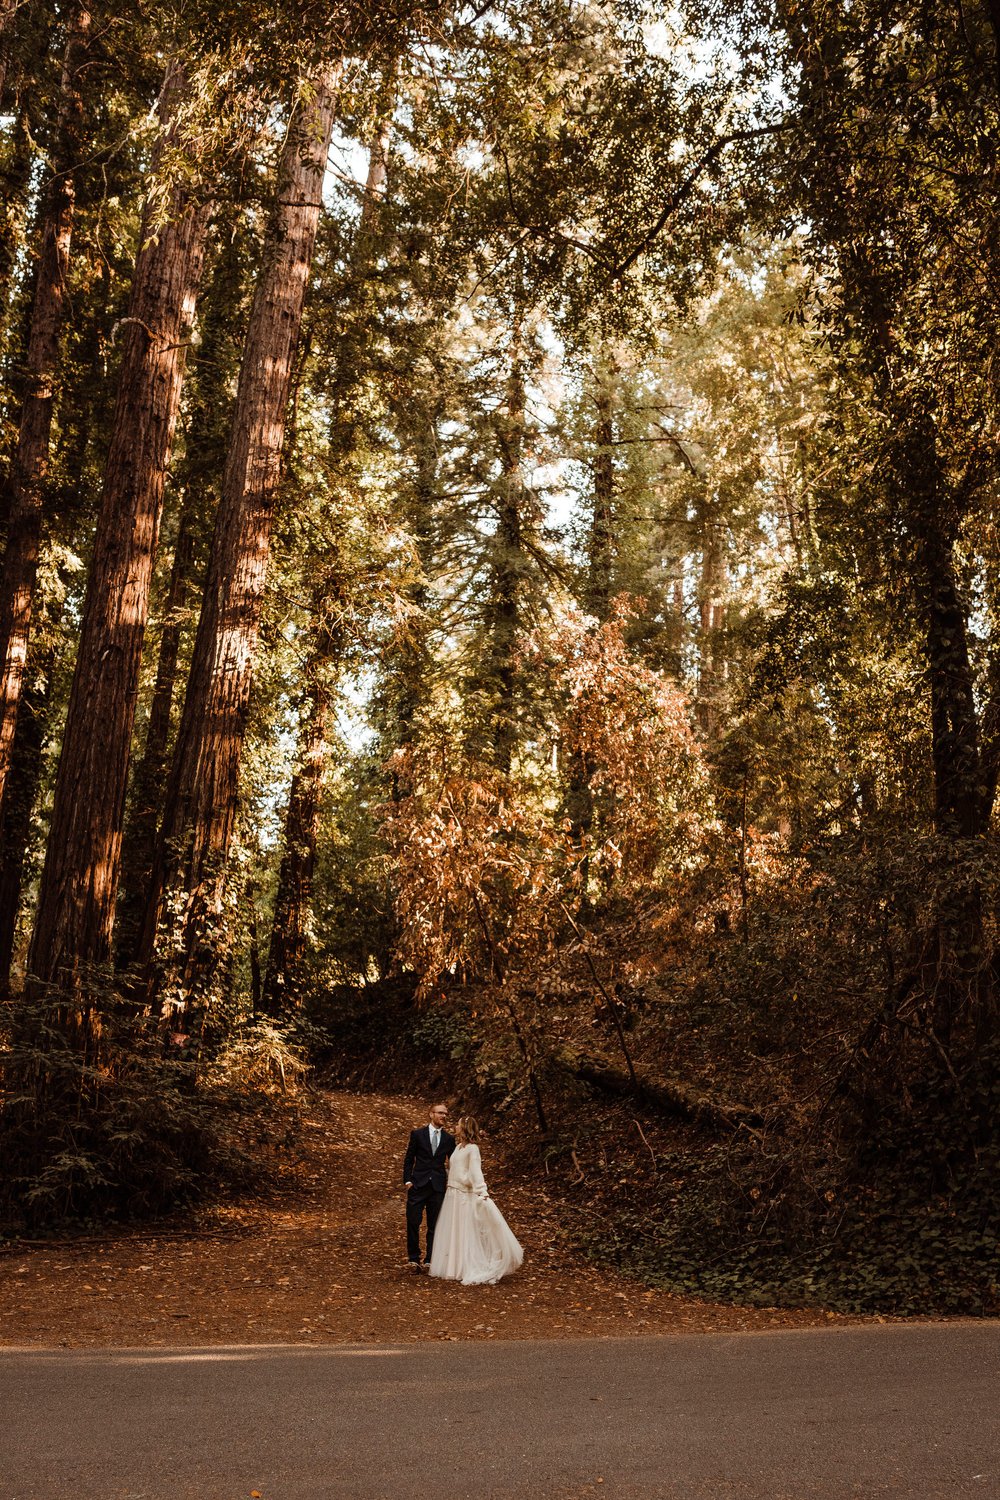 Wedding-in-the-Woods-Bride-and-Groom-Sunlit-Pictures-Beneath-Redwood-Forest (5).jpg